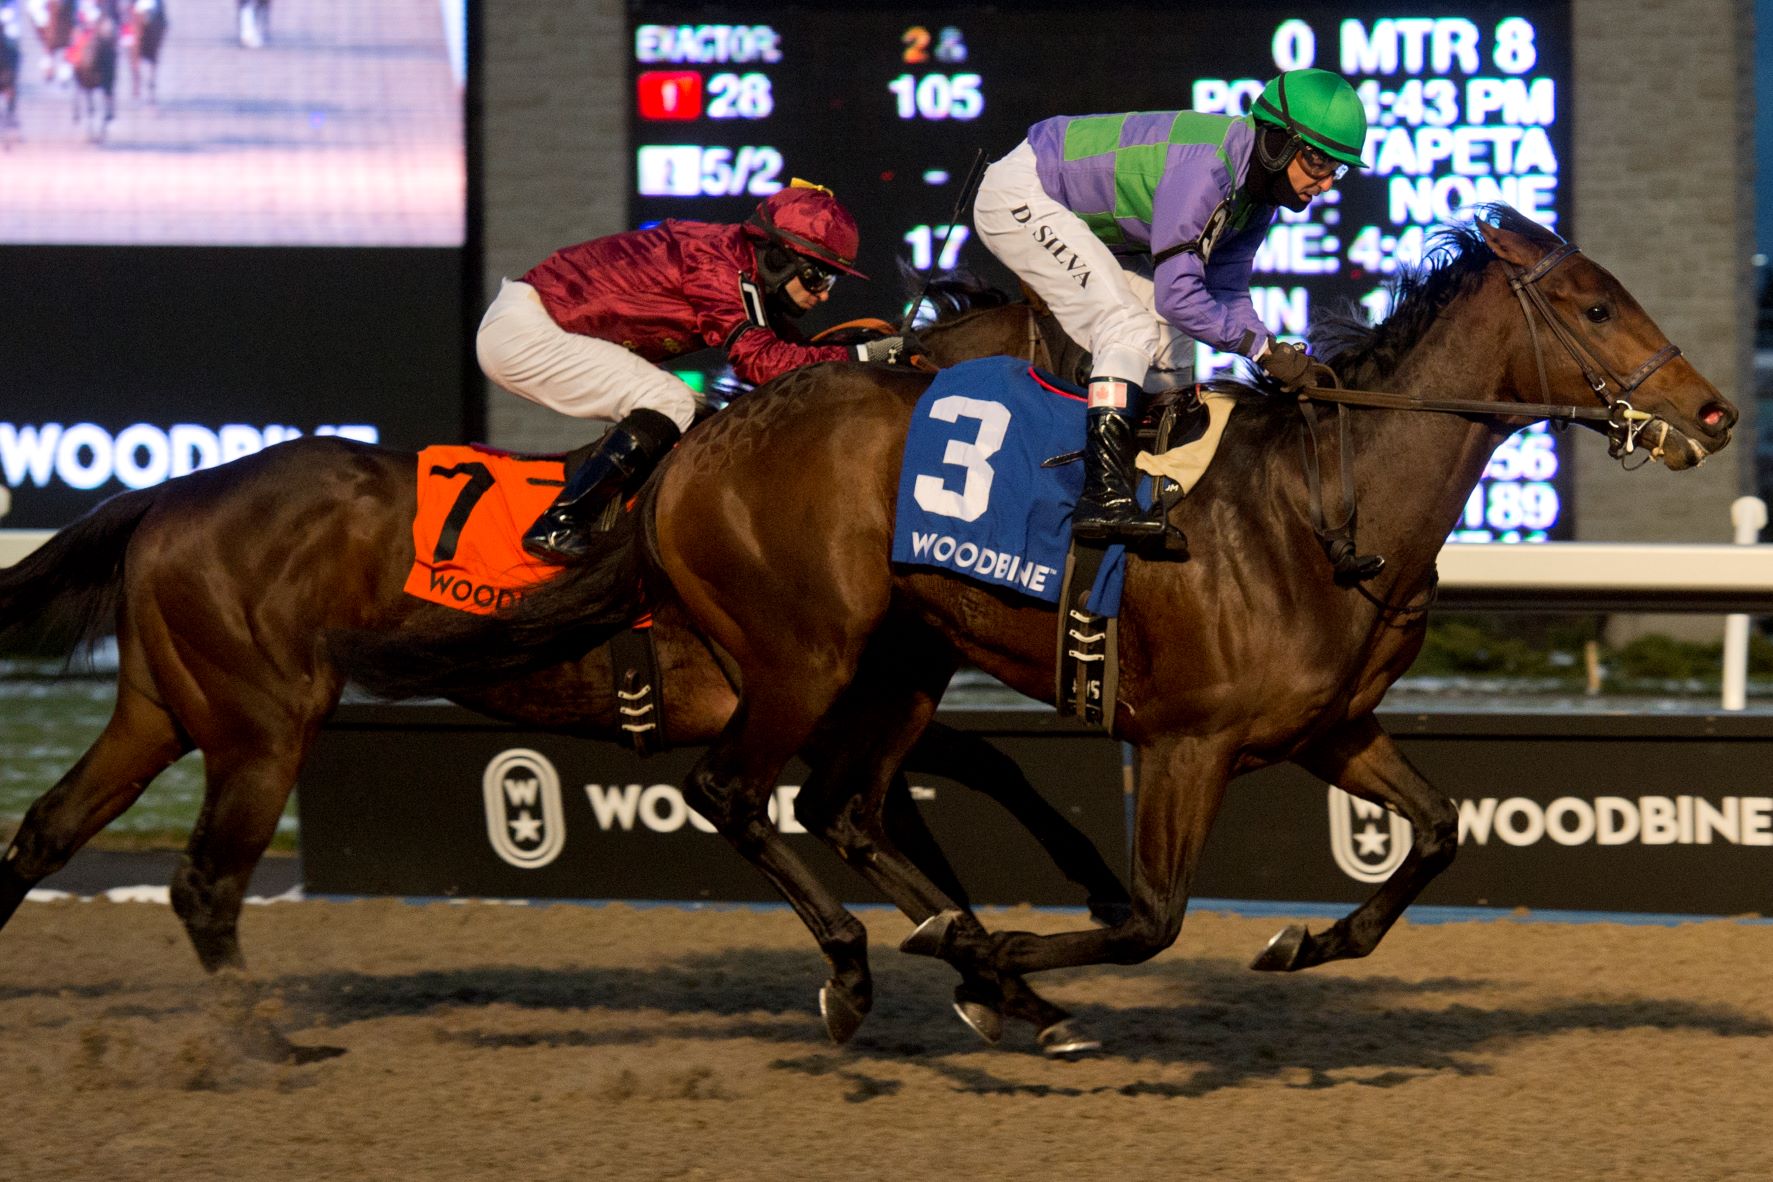 Image 1: Avie’s Flatter wins the 2018 Coronation Futurity on November 11, 2018 with Luis Contreras aboard. This victory propelled the Flatter colt to a Sovereign Award for Champion Two-Year-Old Male.